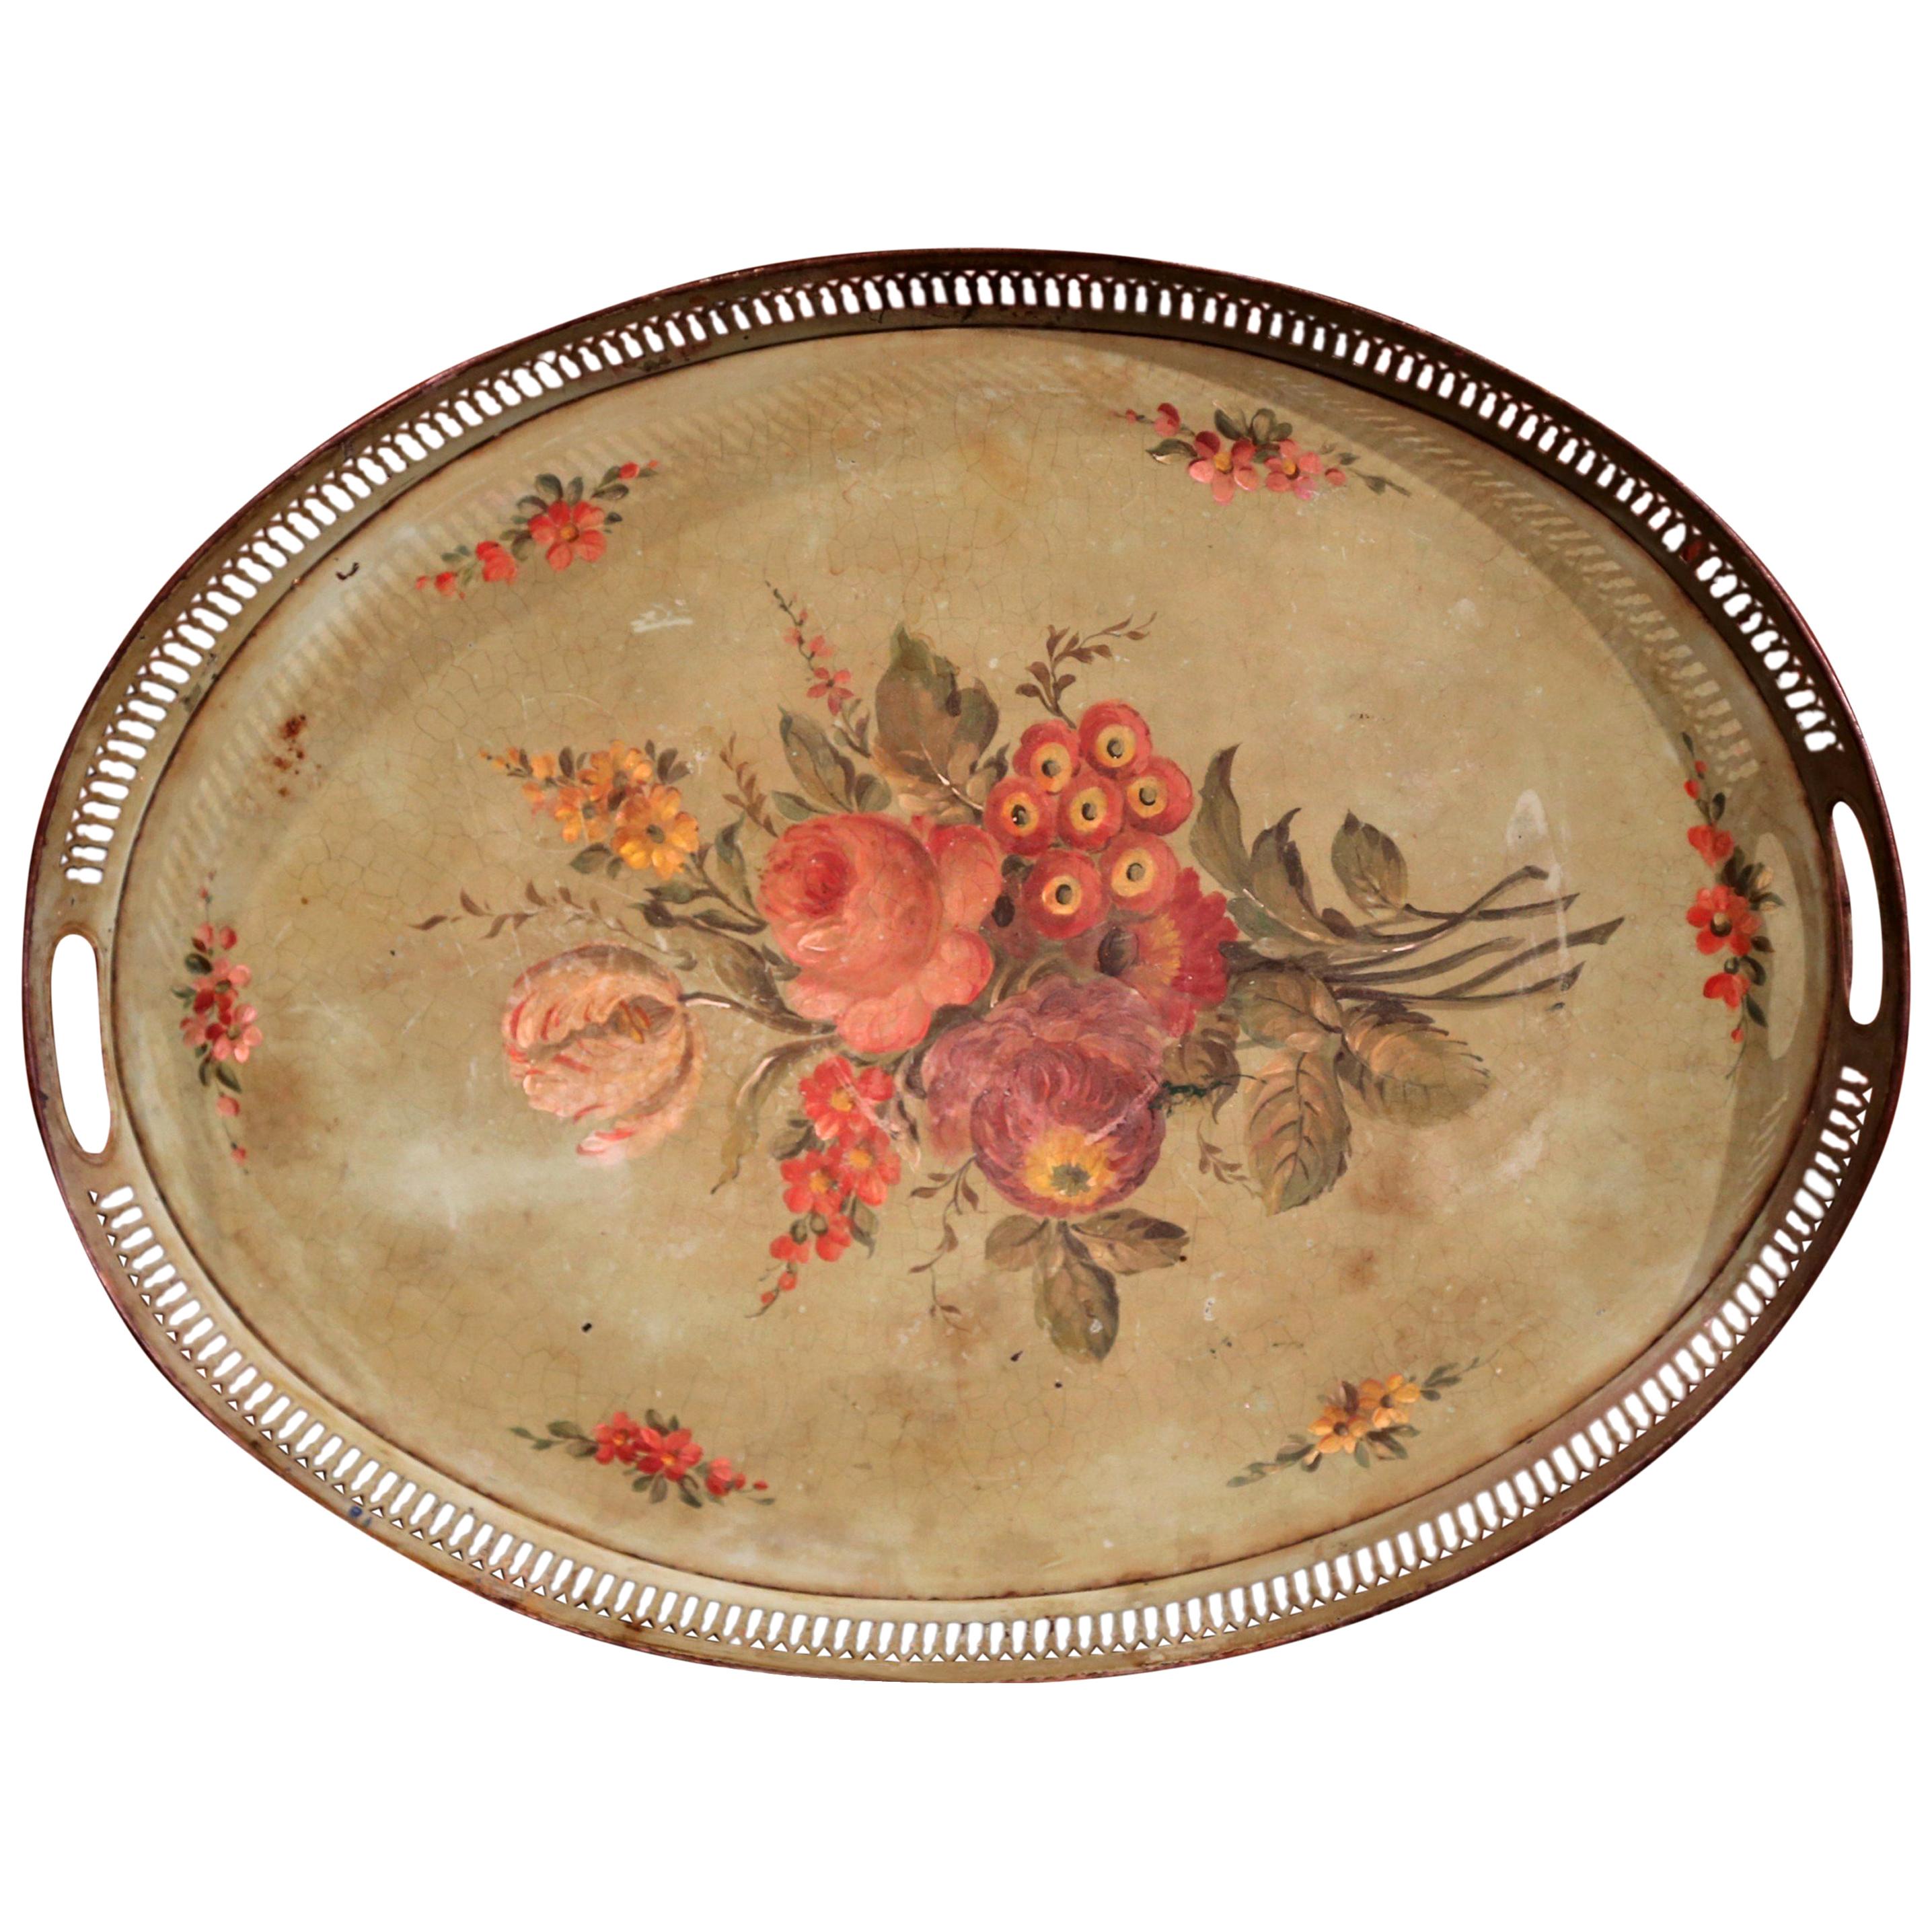 Vintage Tole Tray Large Retangle Shaped with Flowers The American Art Works Social Supper